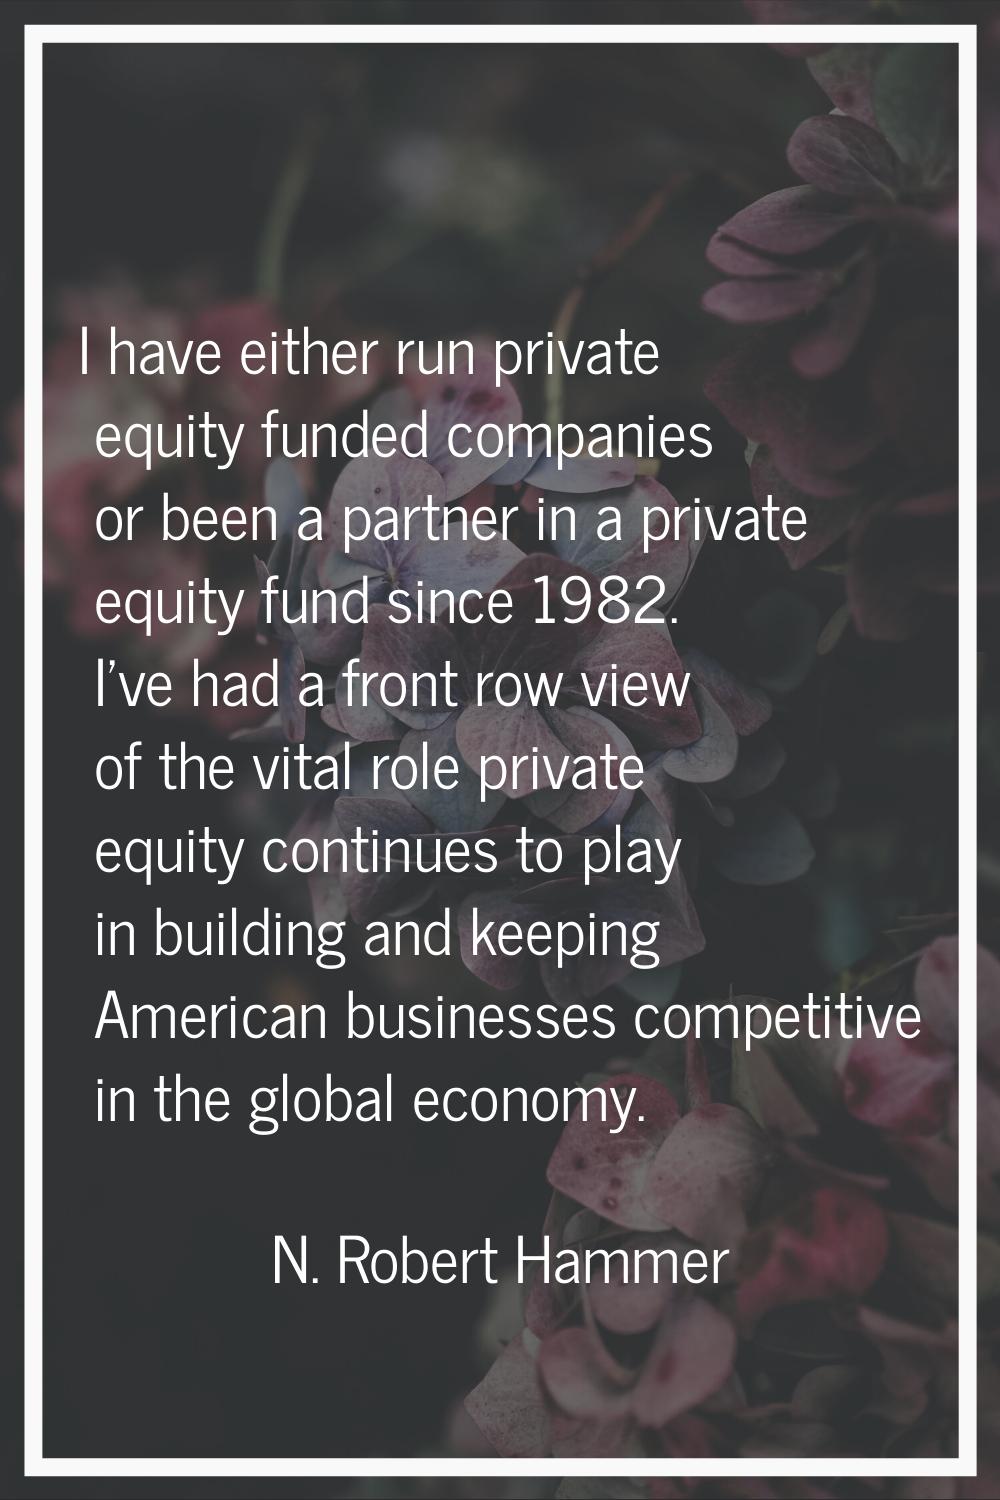 I have either run private equity funded companies or been a partner in a private equity fund since 